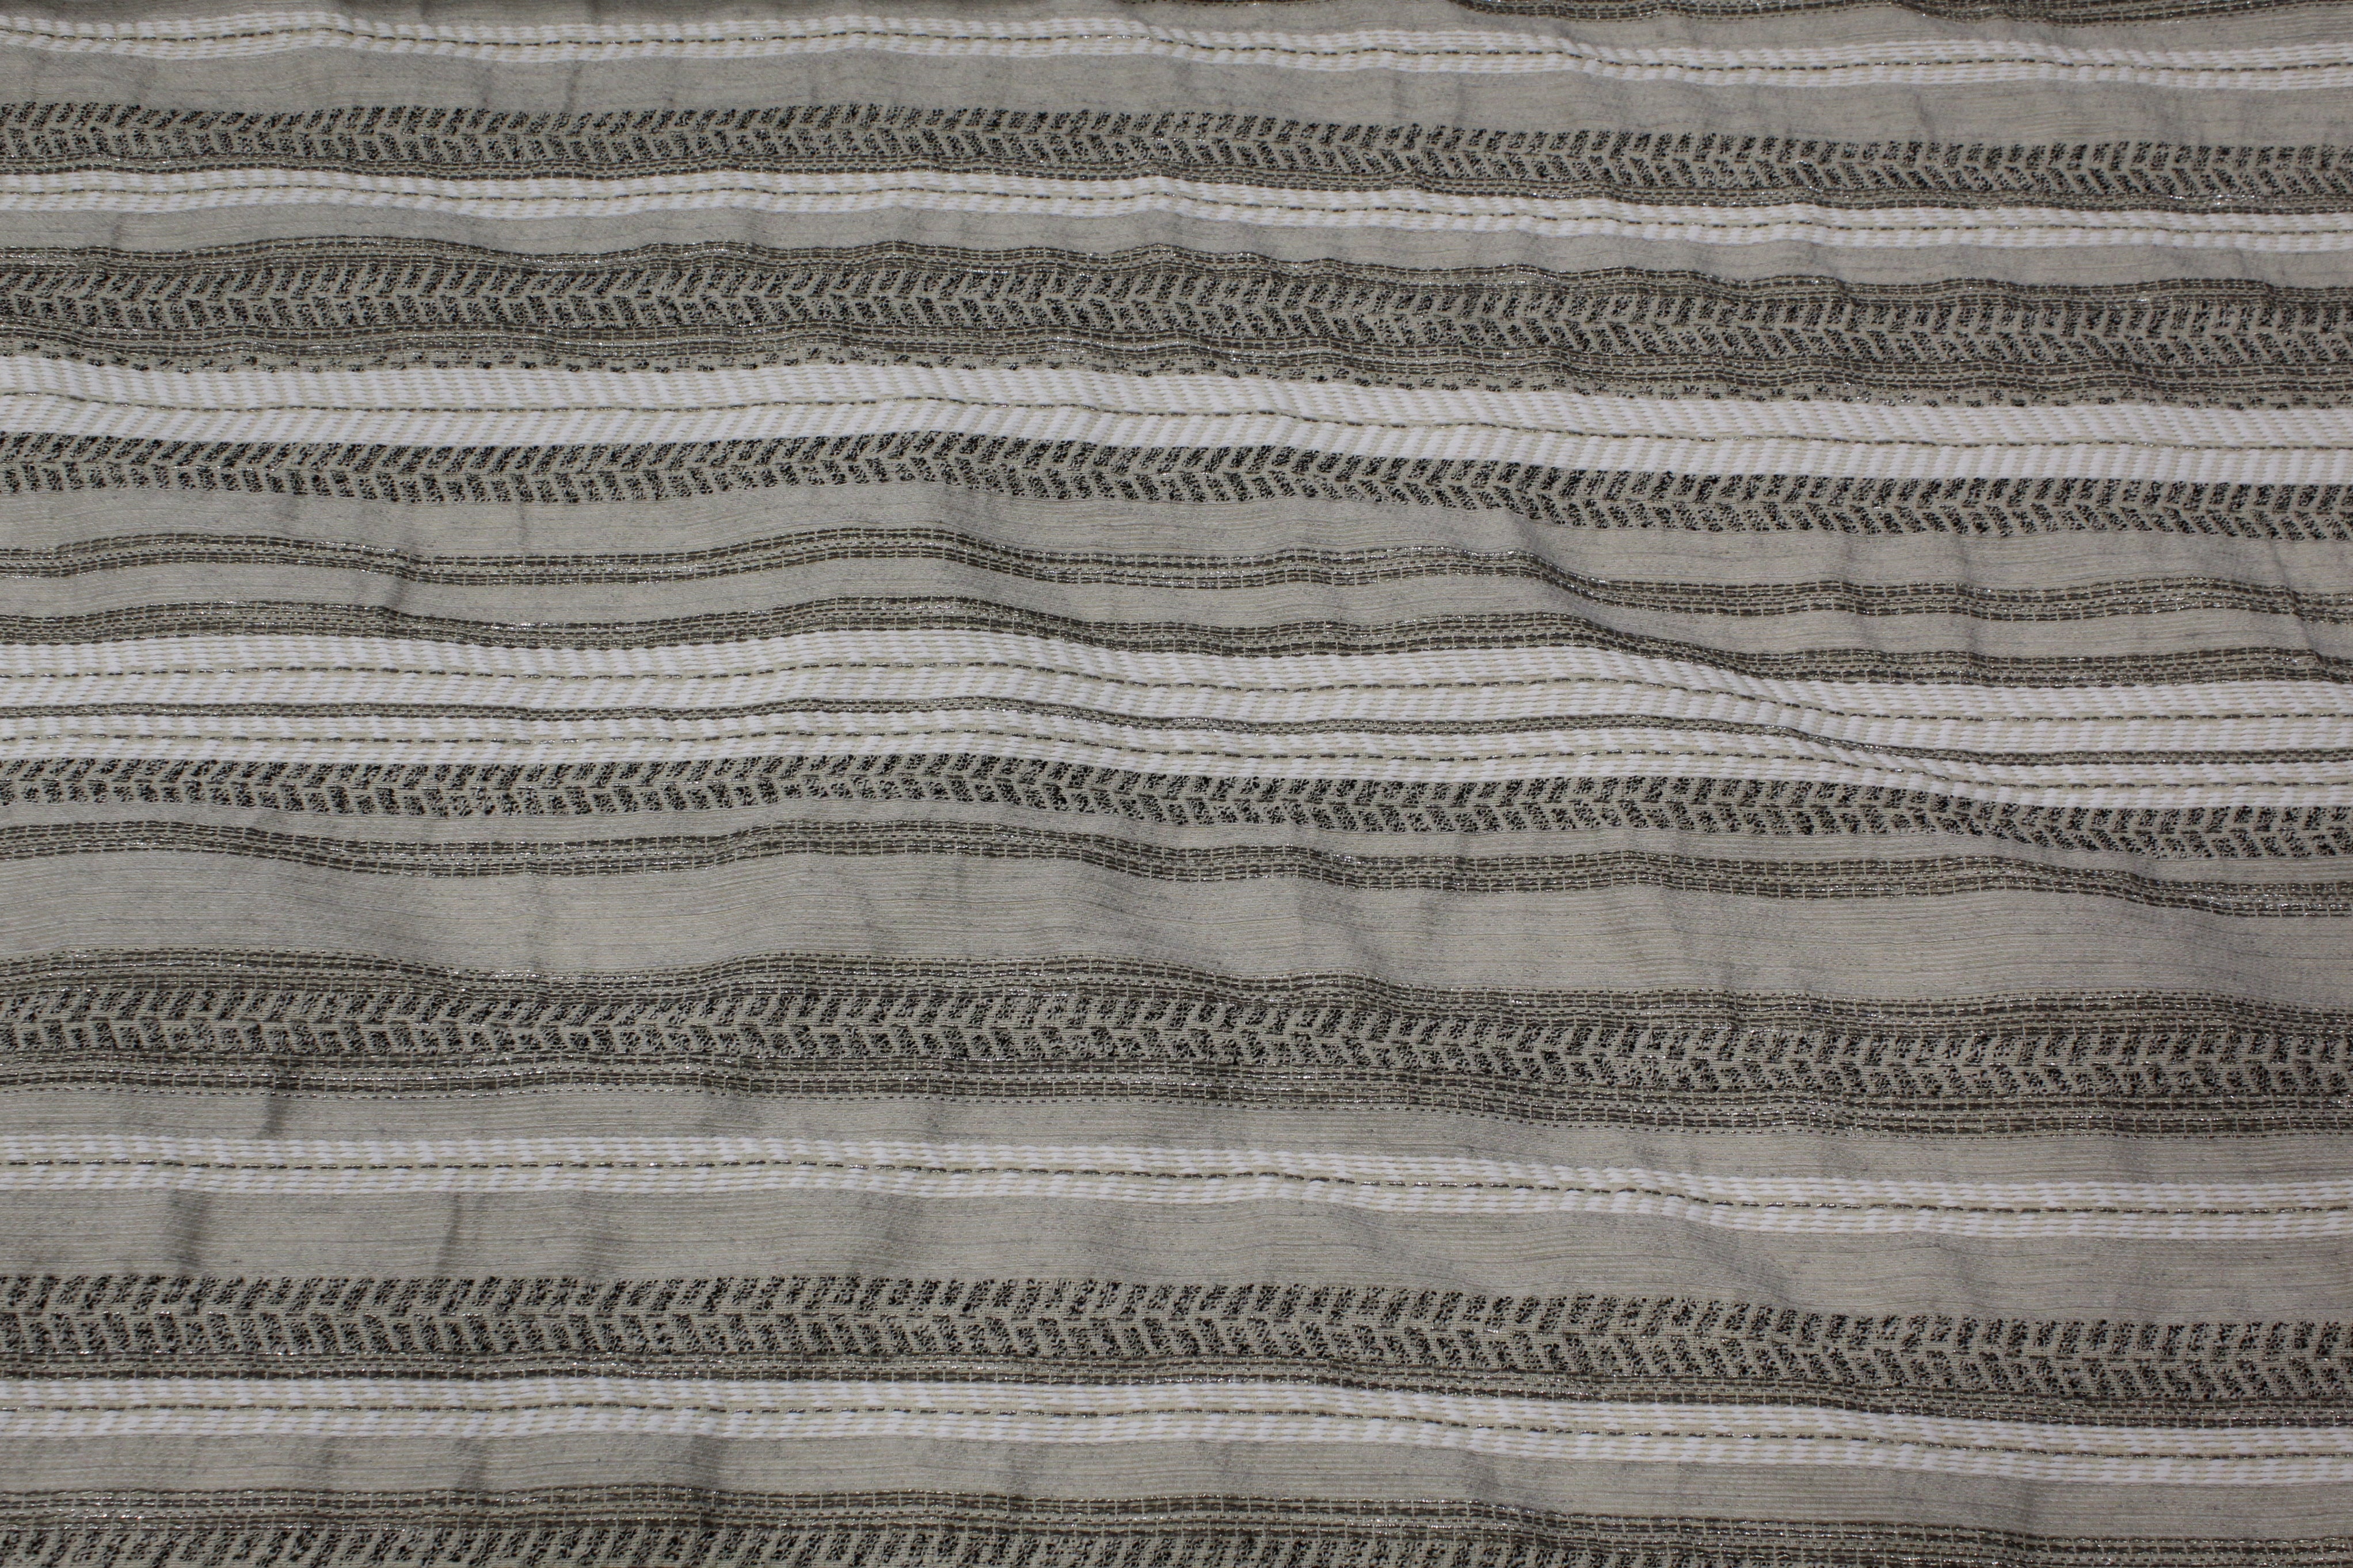 STRIPPED BEIGE AND BLACK JACQUARD-